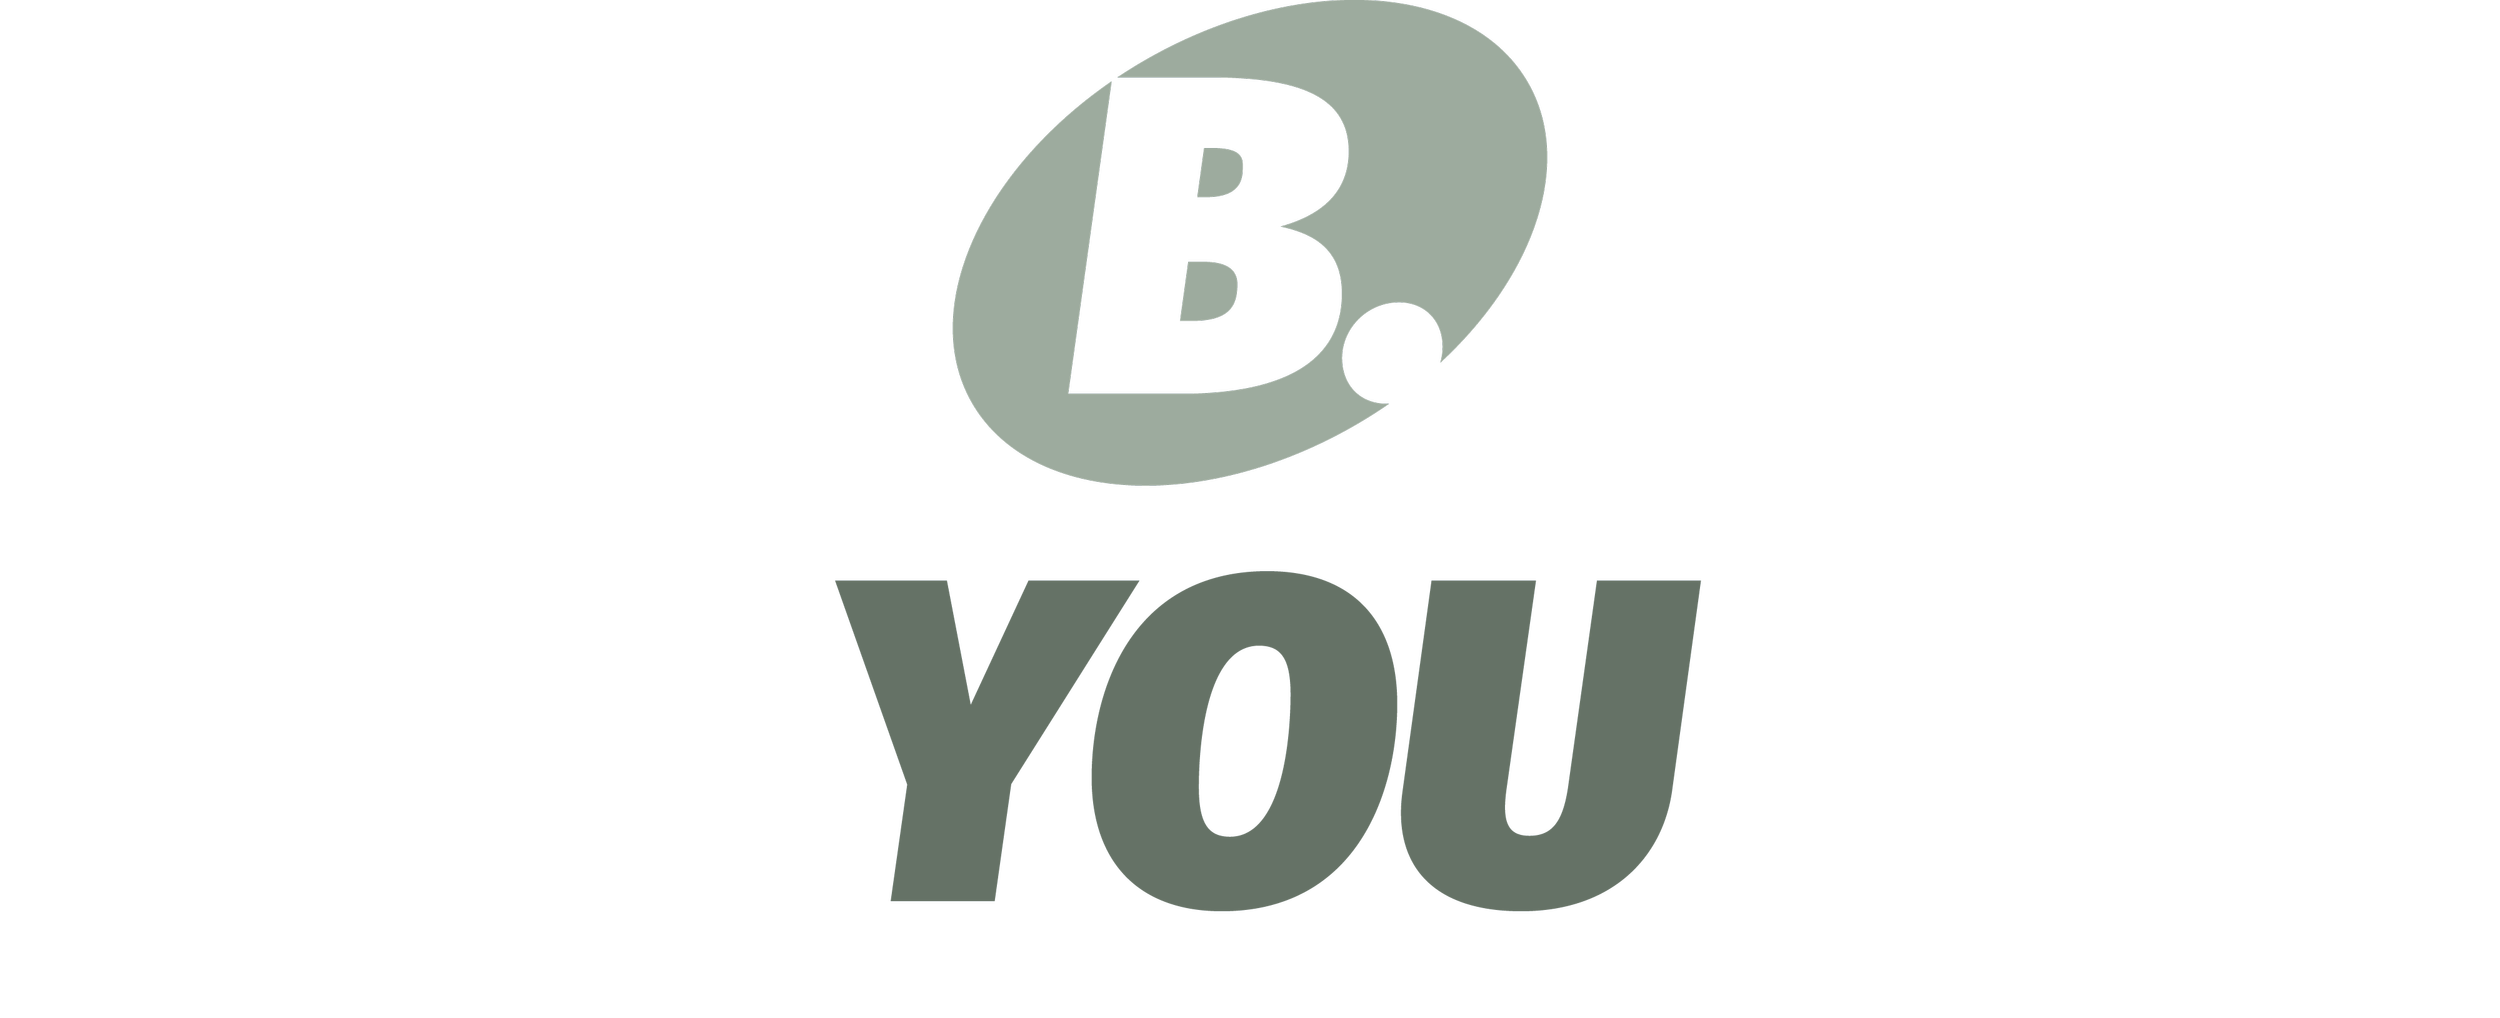 B. YOU.png